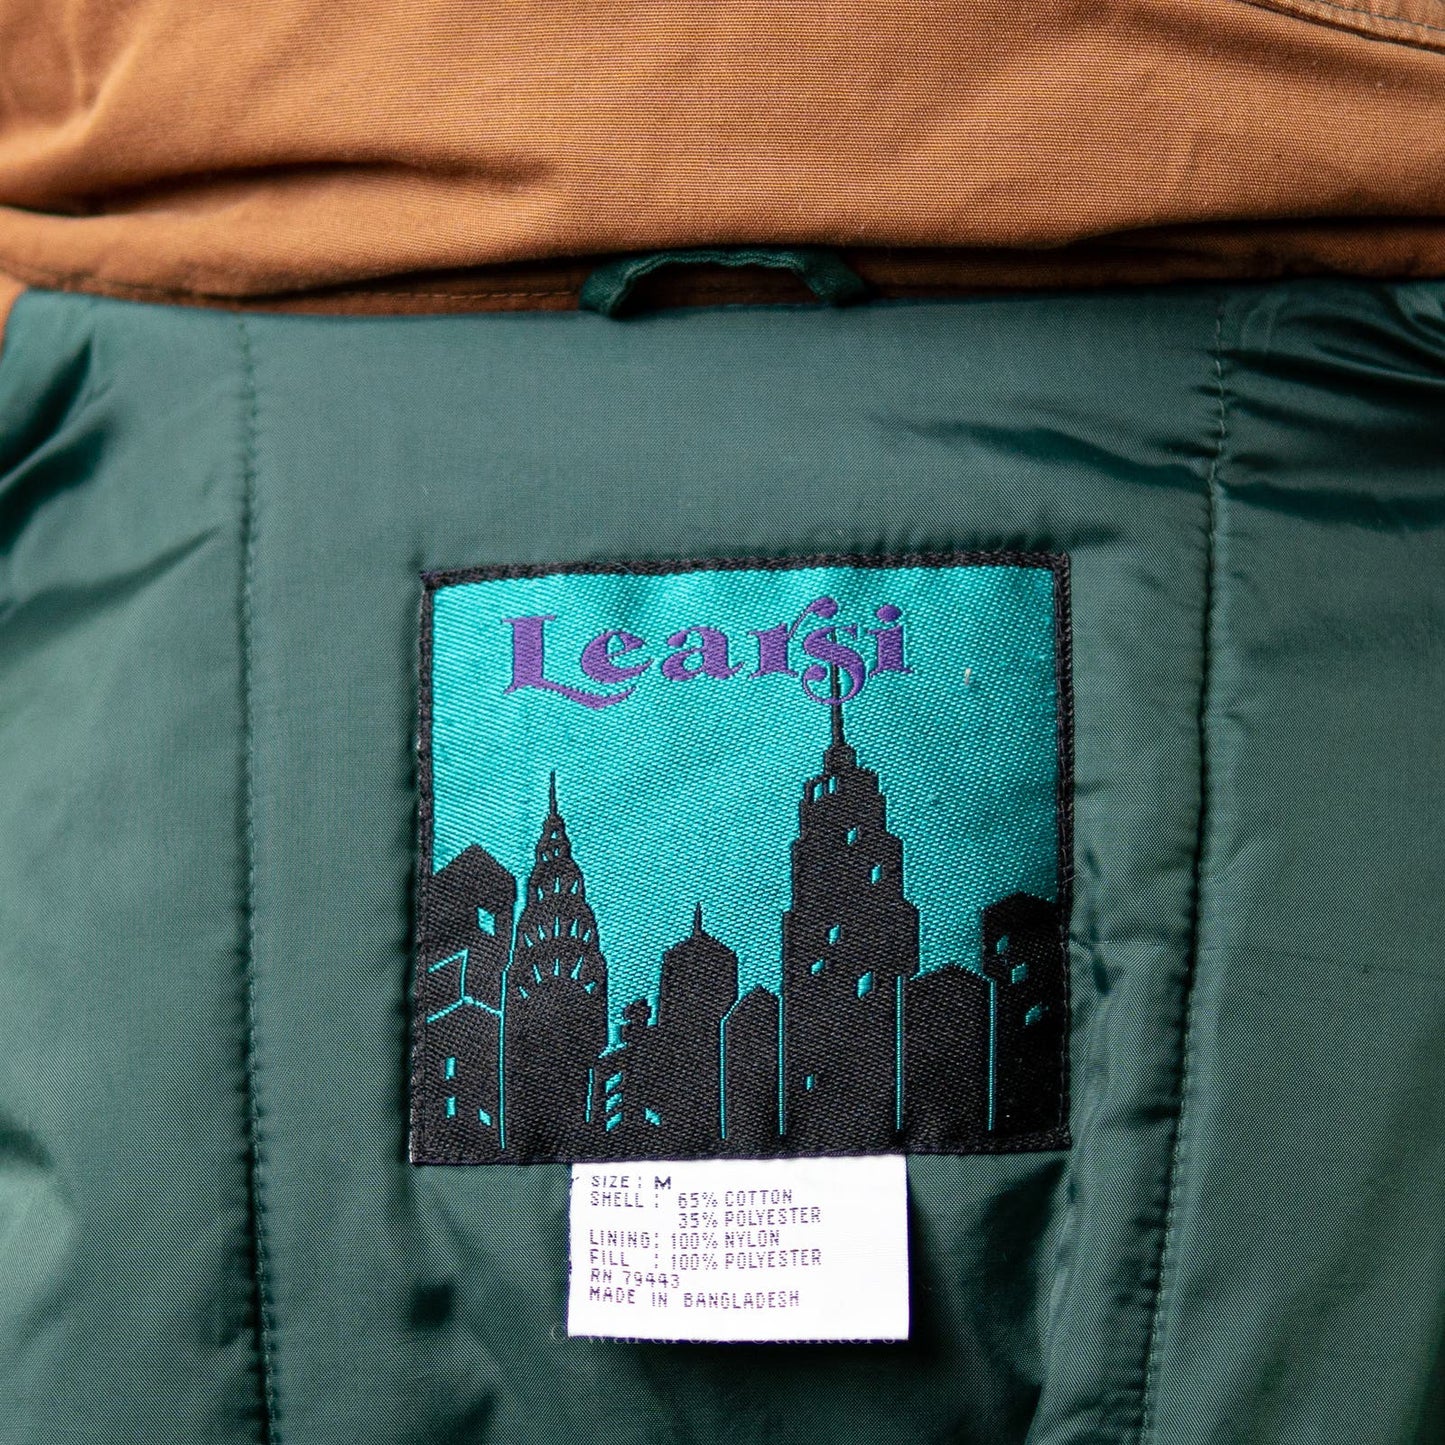 Vintage 90s Forest Green Quilted Parka Jacket by Learsi - M